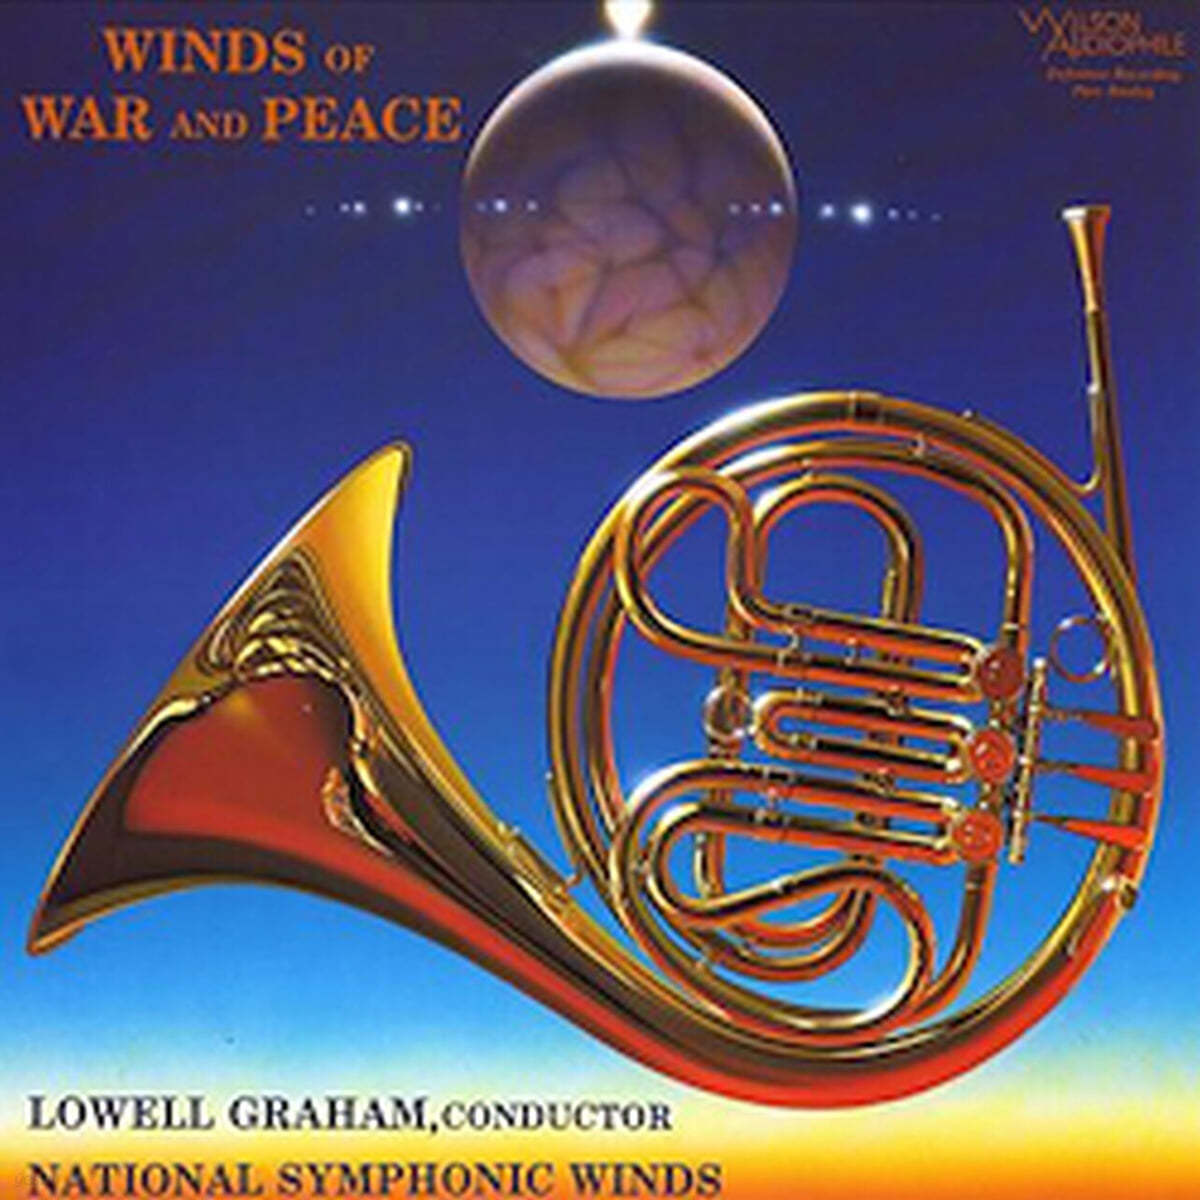 Lowell Graham 관악 앙상블 작품집 - 전쟁과 평화 (Winds Of War and Peace) [2LP] 